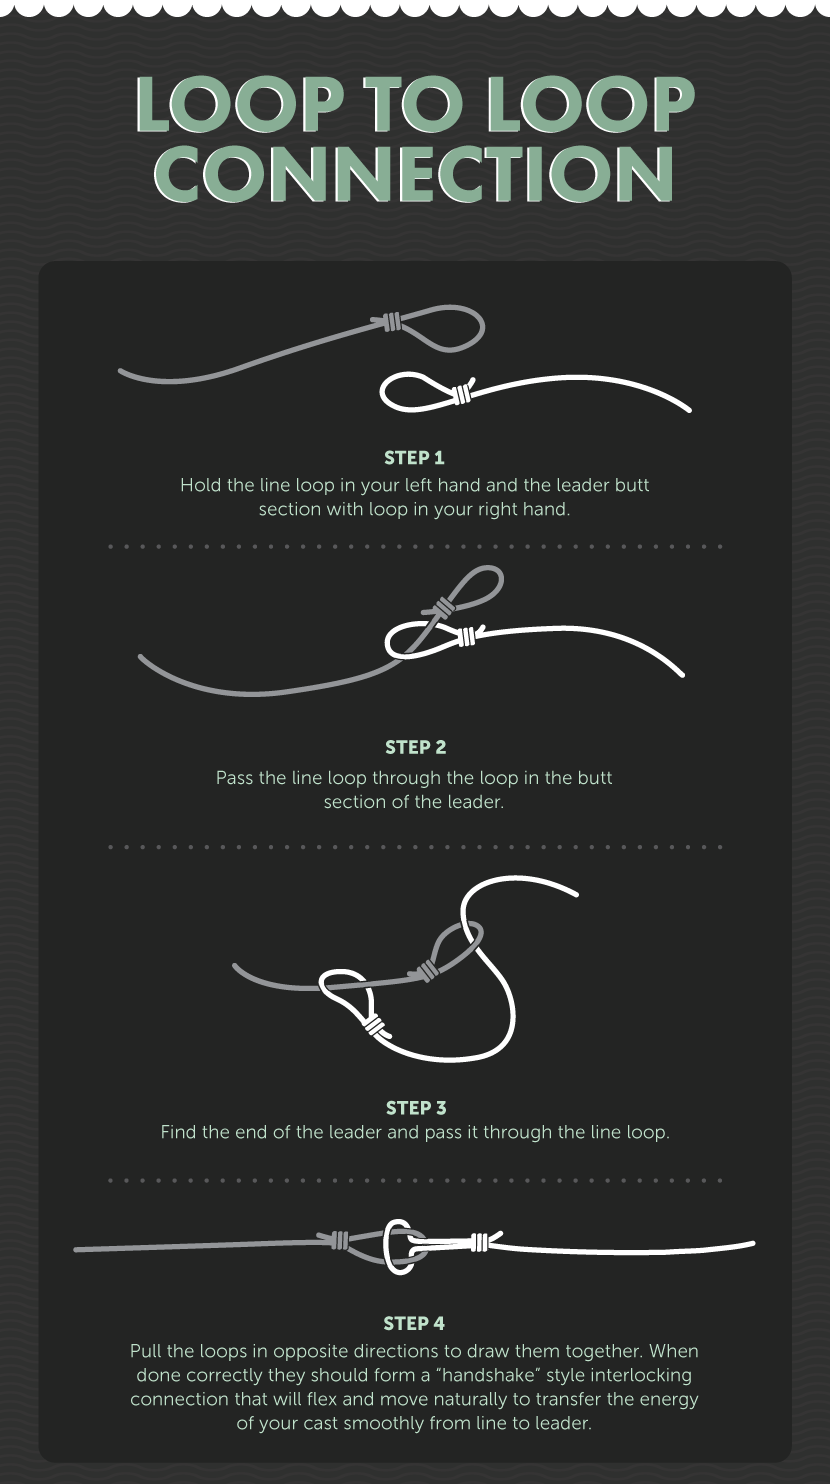 Fishing Pole Knot - Attach Fishing Line to Pole - How to Fish 